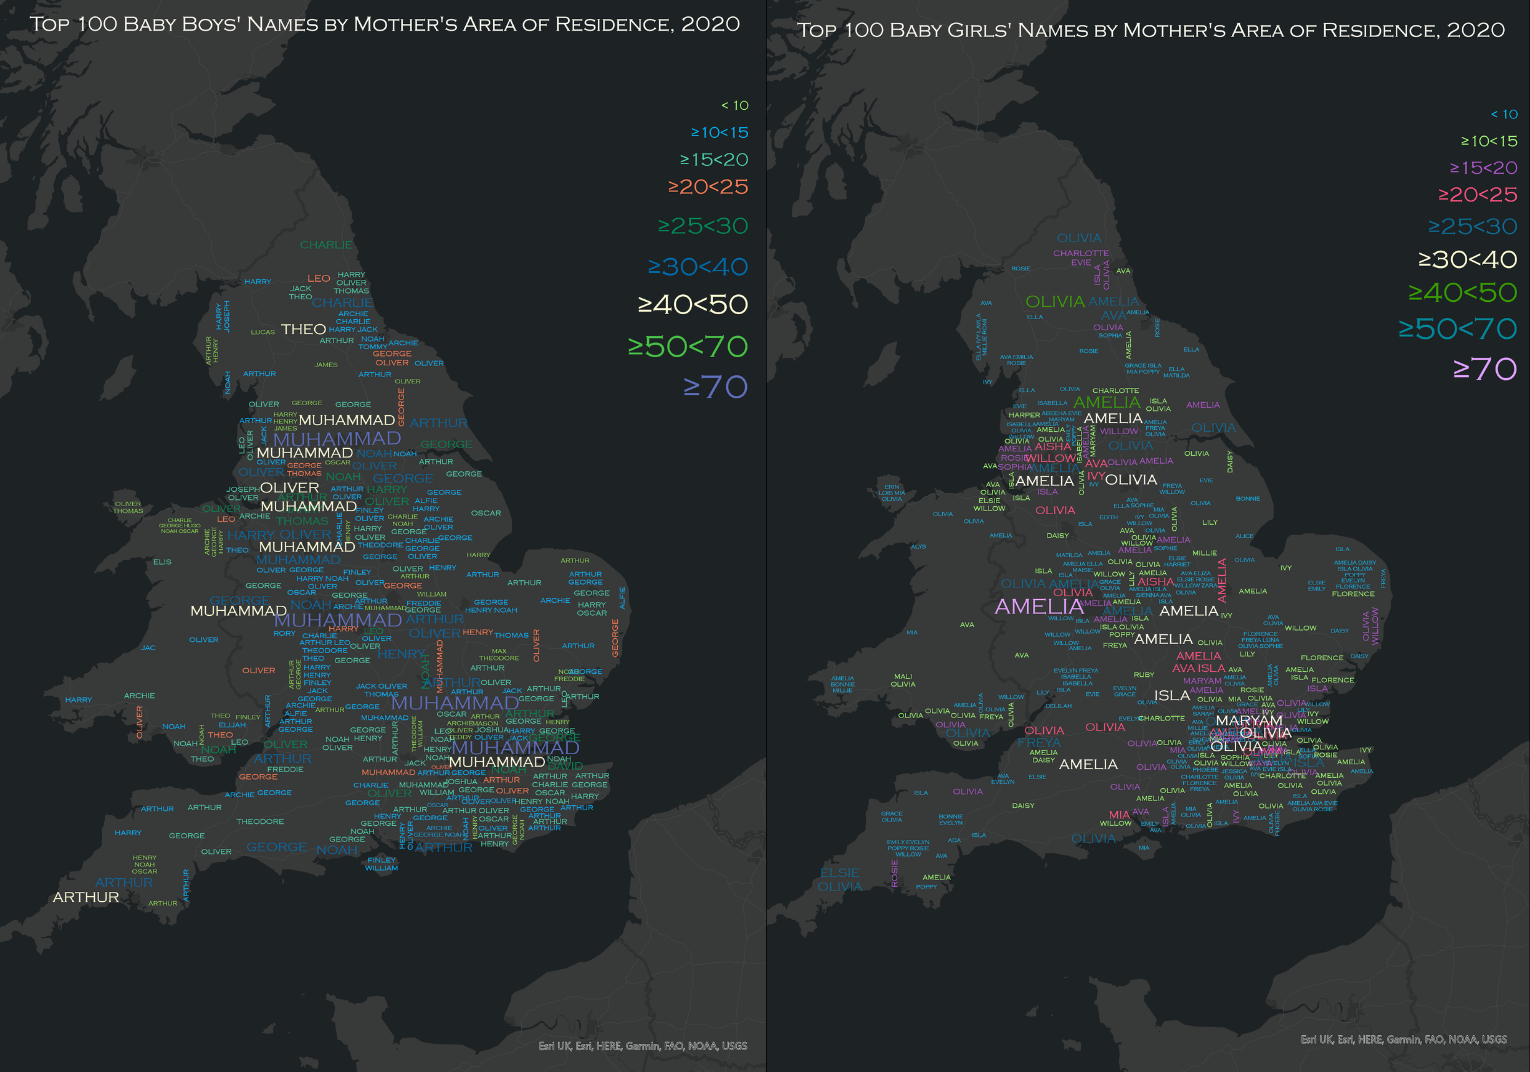 Two maps displaying the top 100 male and female baby names for England and Wales, in 2020